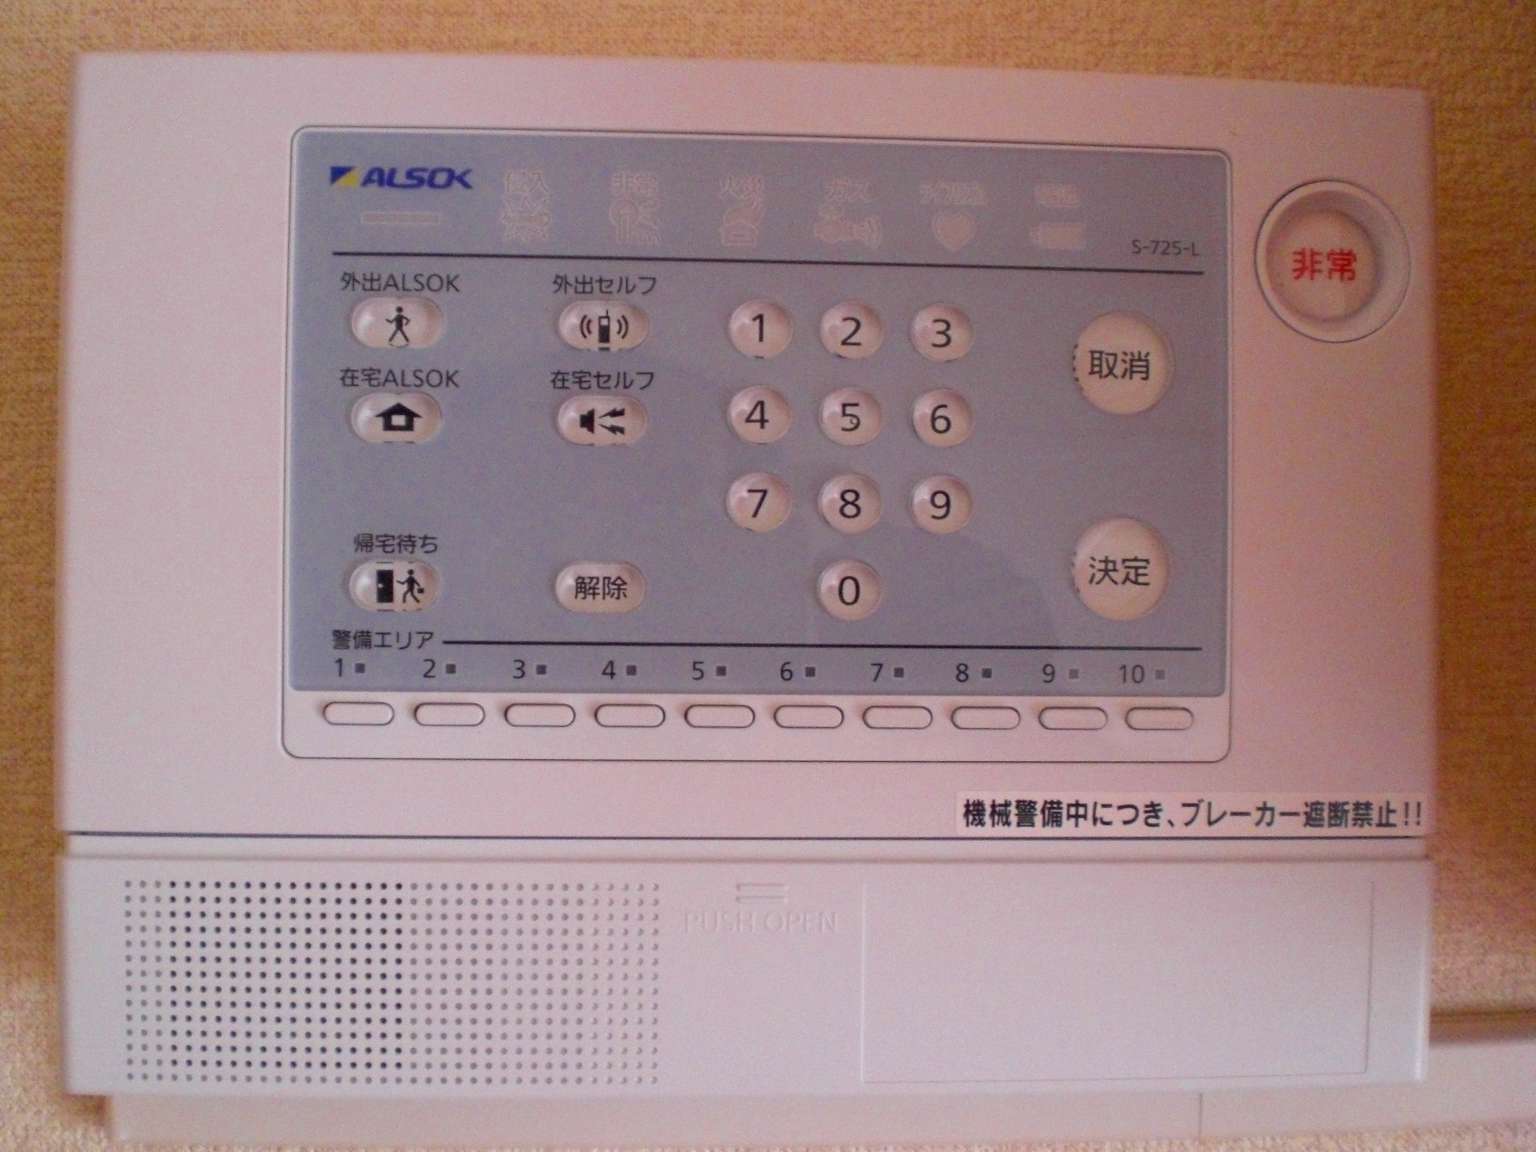 Other. Home security ・ ALSOK Also safe living alone